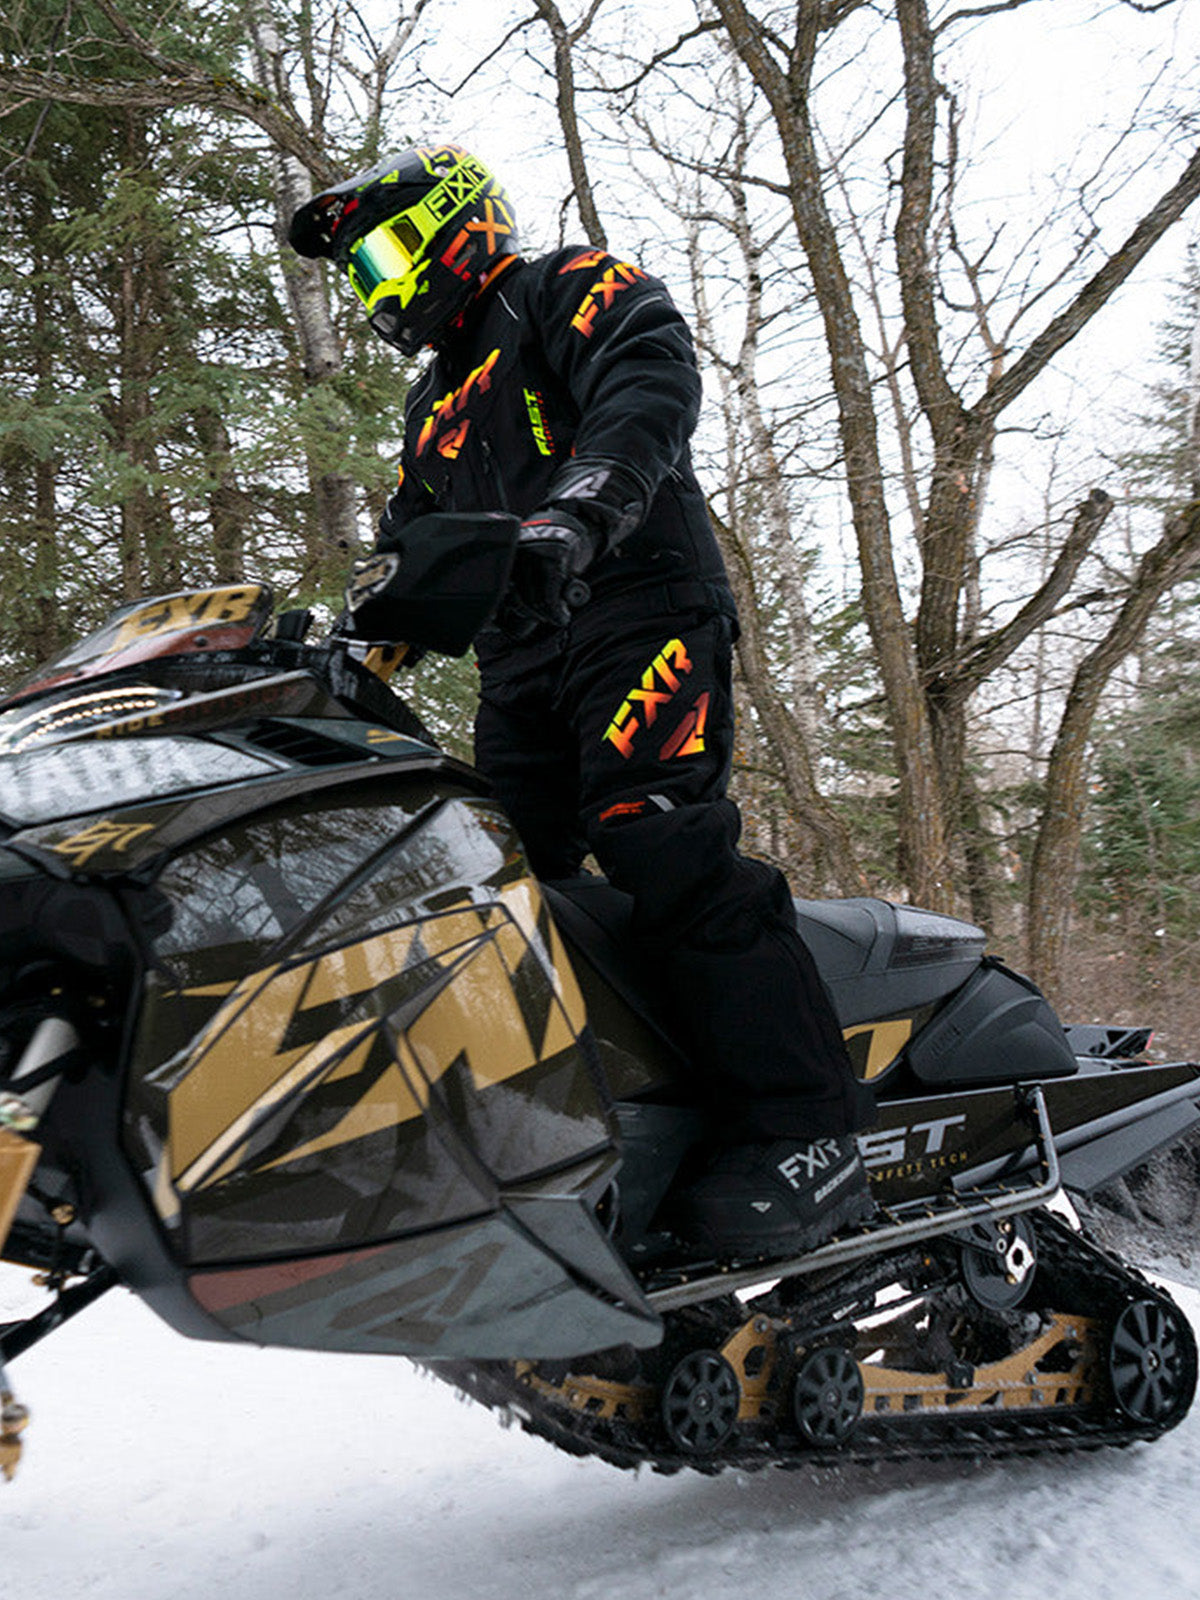 Action image of a guy snowmobiling on a trail wearing an FXR gear from FXR's Performance Trail collection